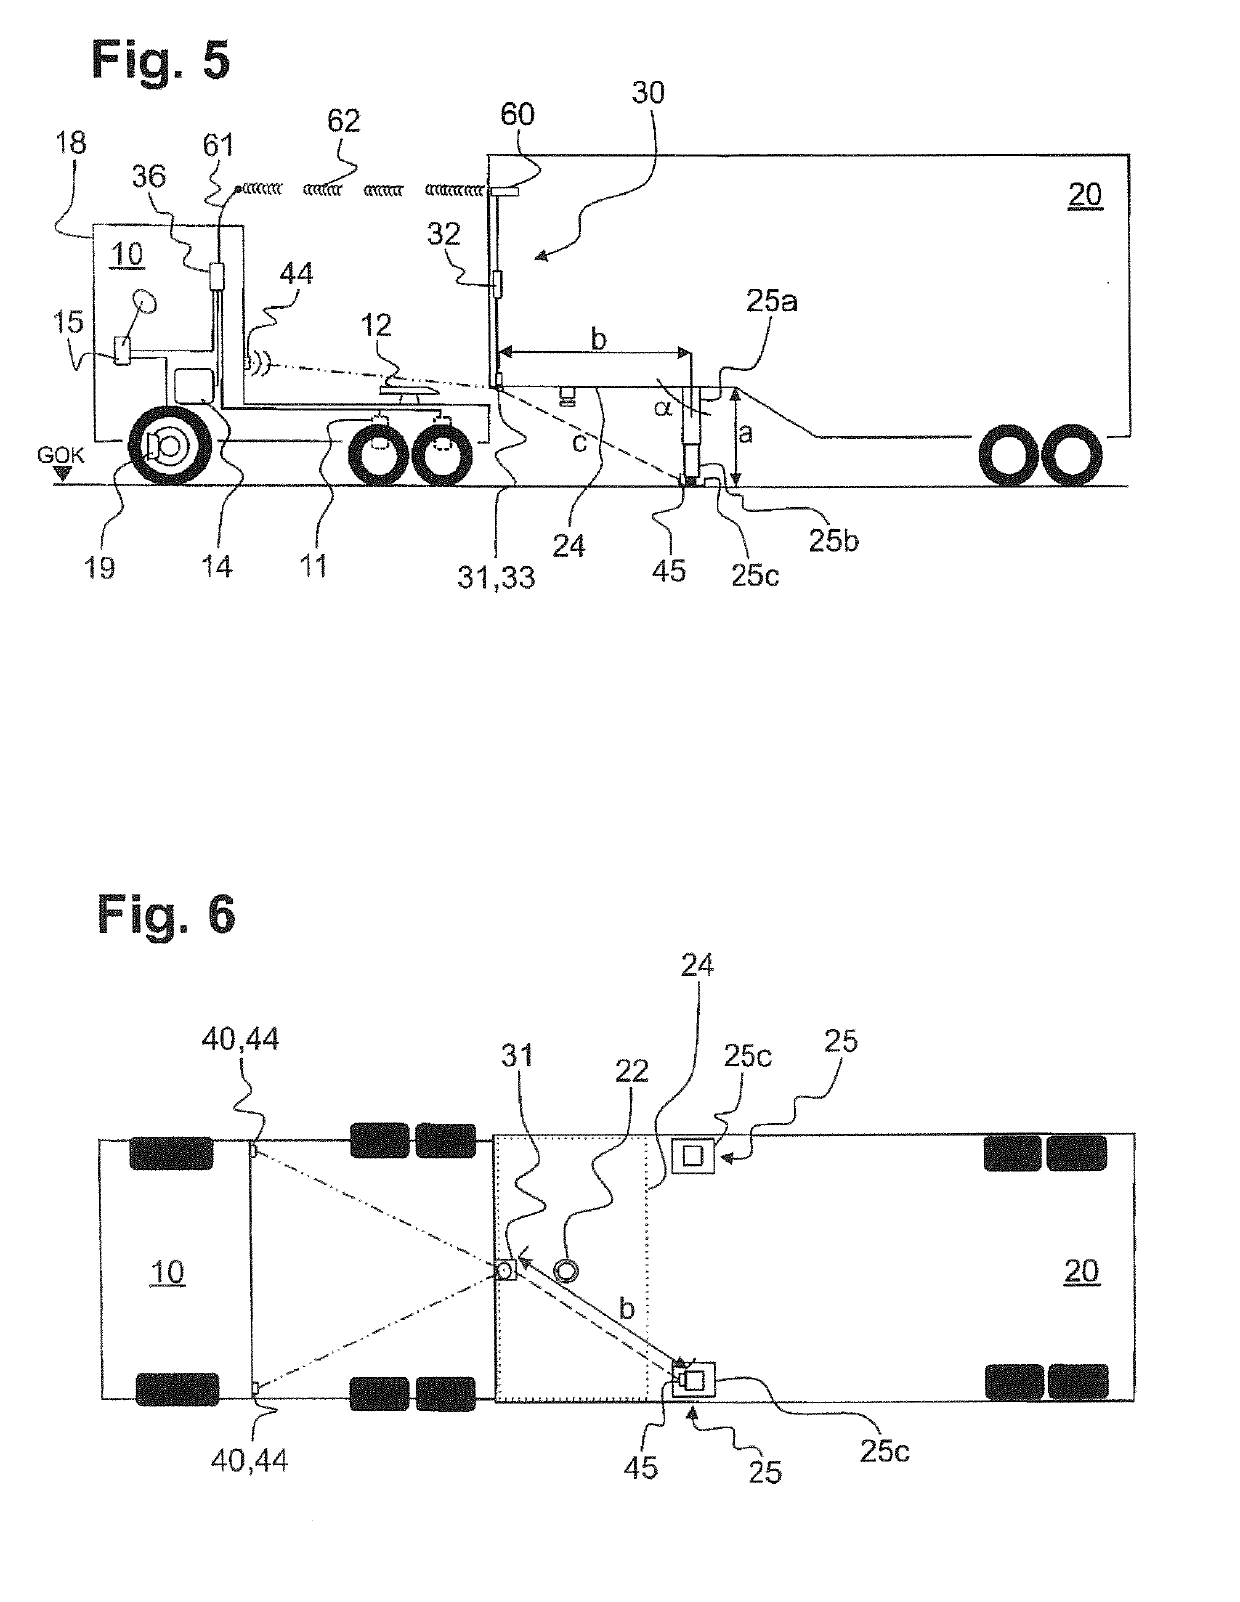 Device for Detecting the Position of a First or Second Vehicle to be Coupled Together